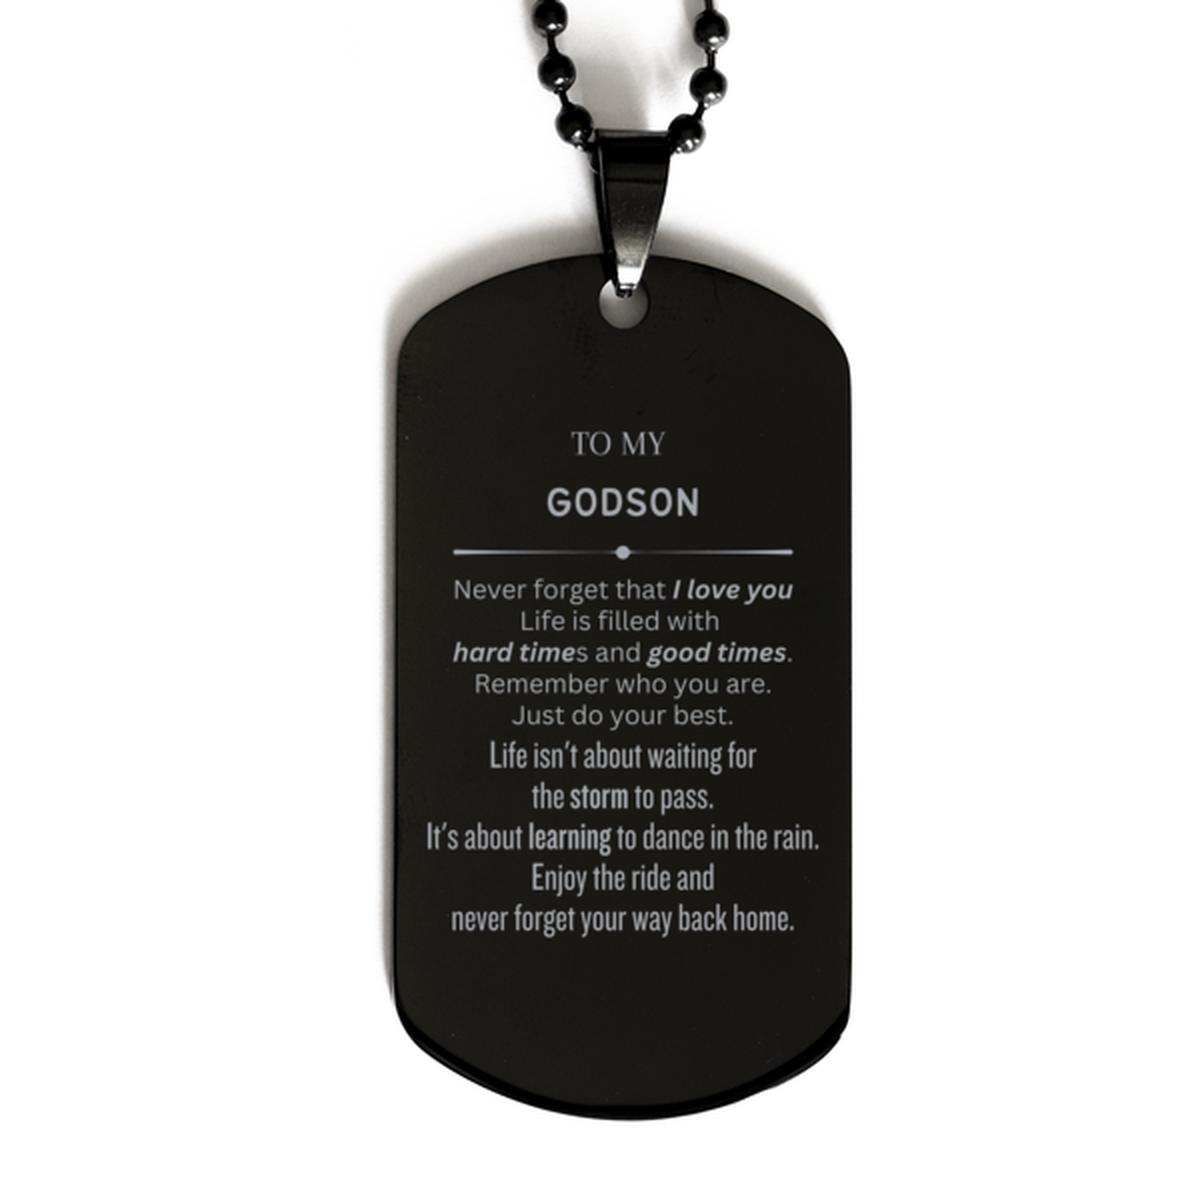 Christmas Godson Black Dog Tag Gifts, To My Godson Birthday Thank You Gifts For Godson, Graduation Unique Gifts For Godson To My Godson Never forget that I love you life is filled with hard times and good times. Remember who you are. Just do your best